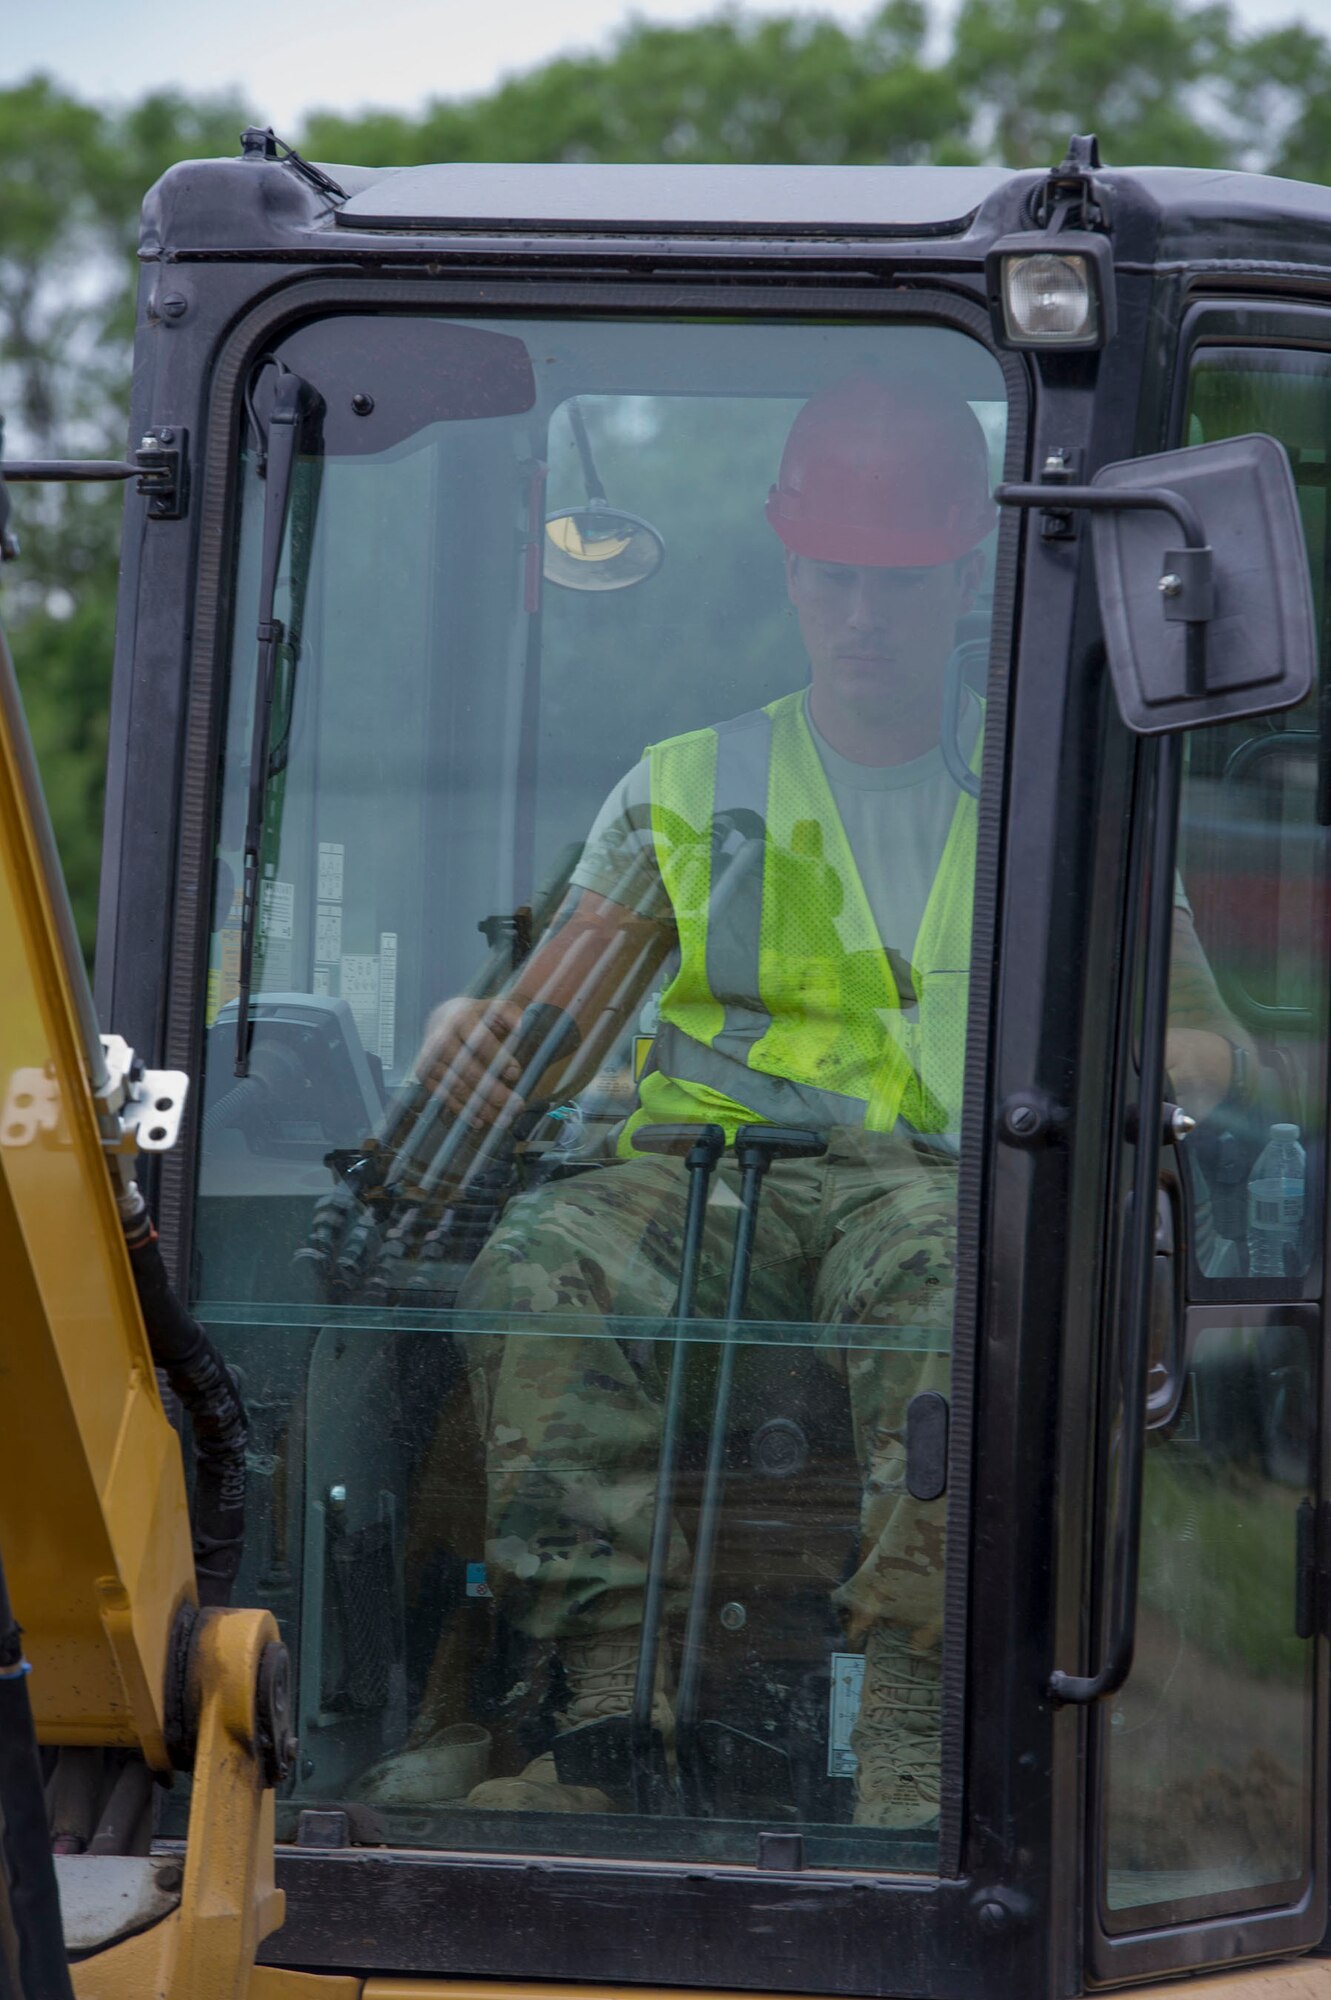 Tech. Sgt. Jonathan Liebherr, 560th RED HORSE Squadron site lead, operates an excavator at a construction site on Minneapolis-St. Paul Air Reserve Station, Minn., June 11, 2019.